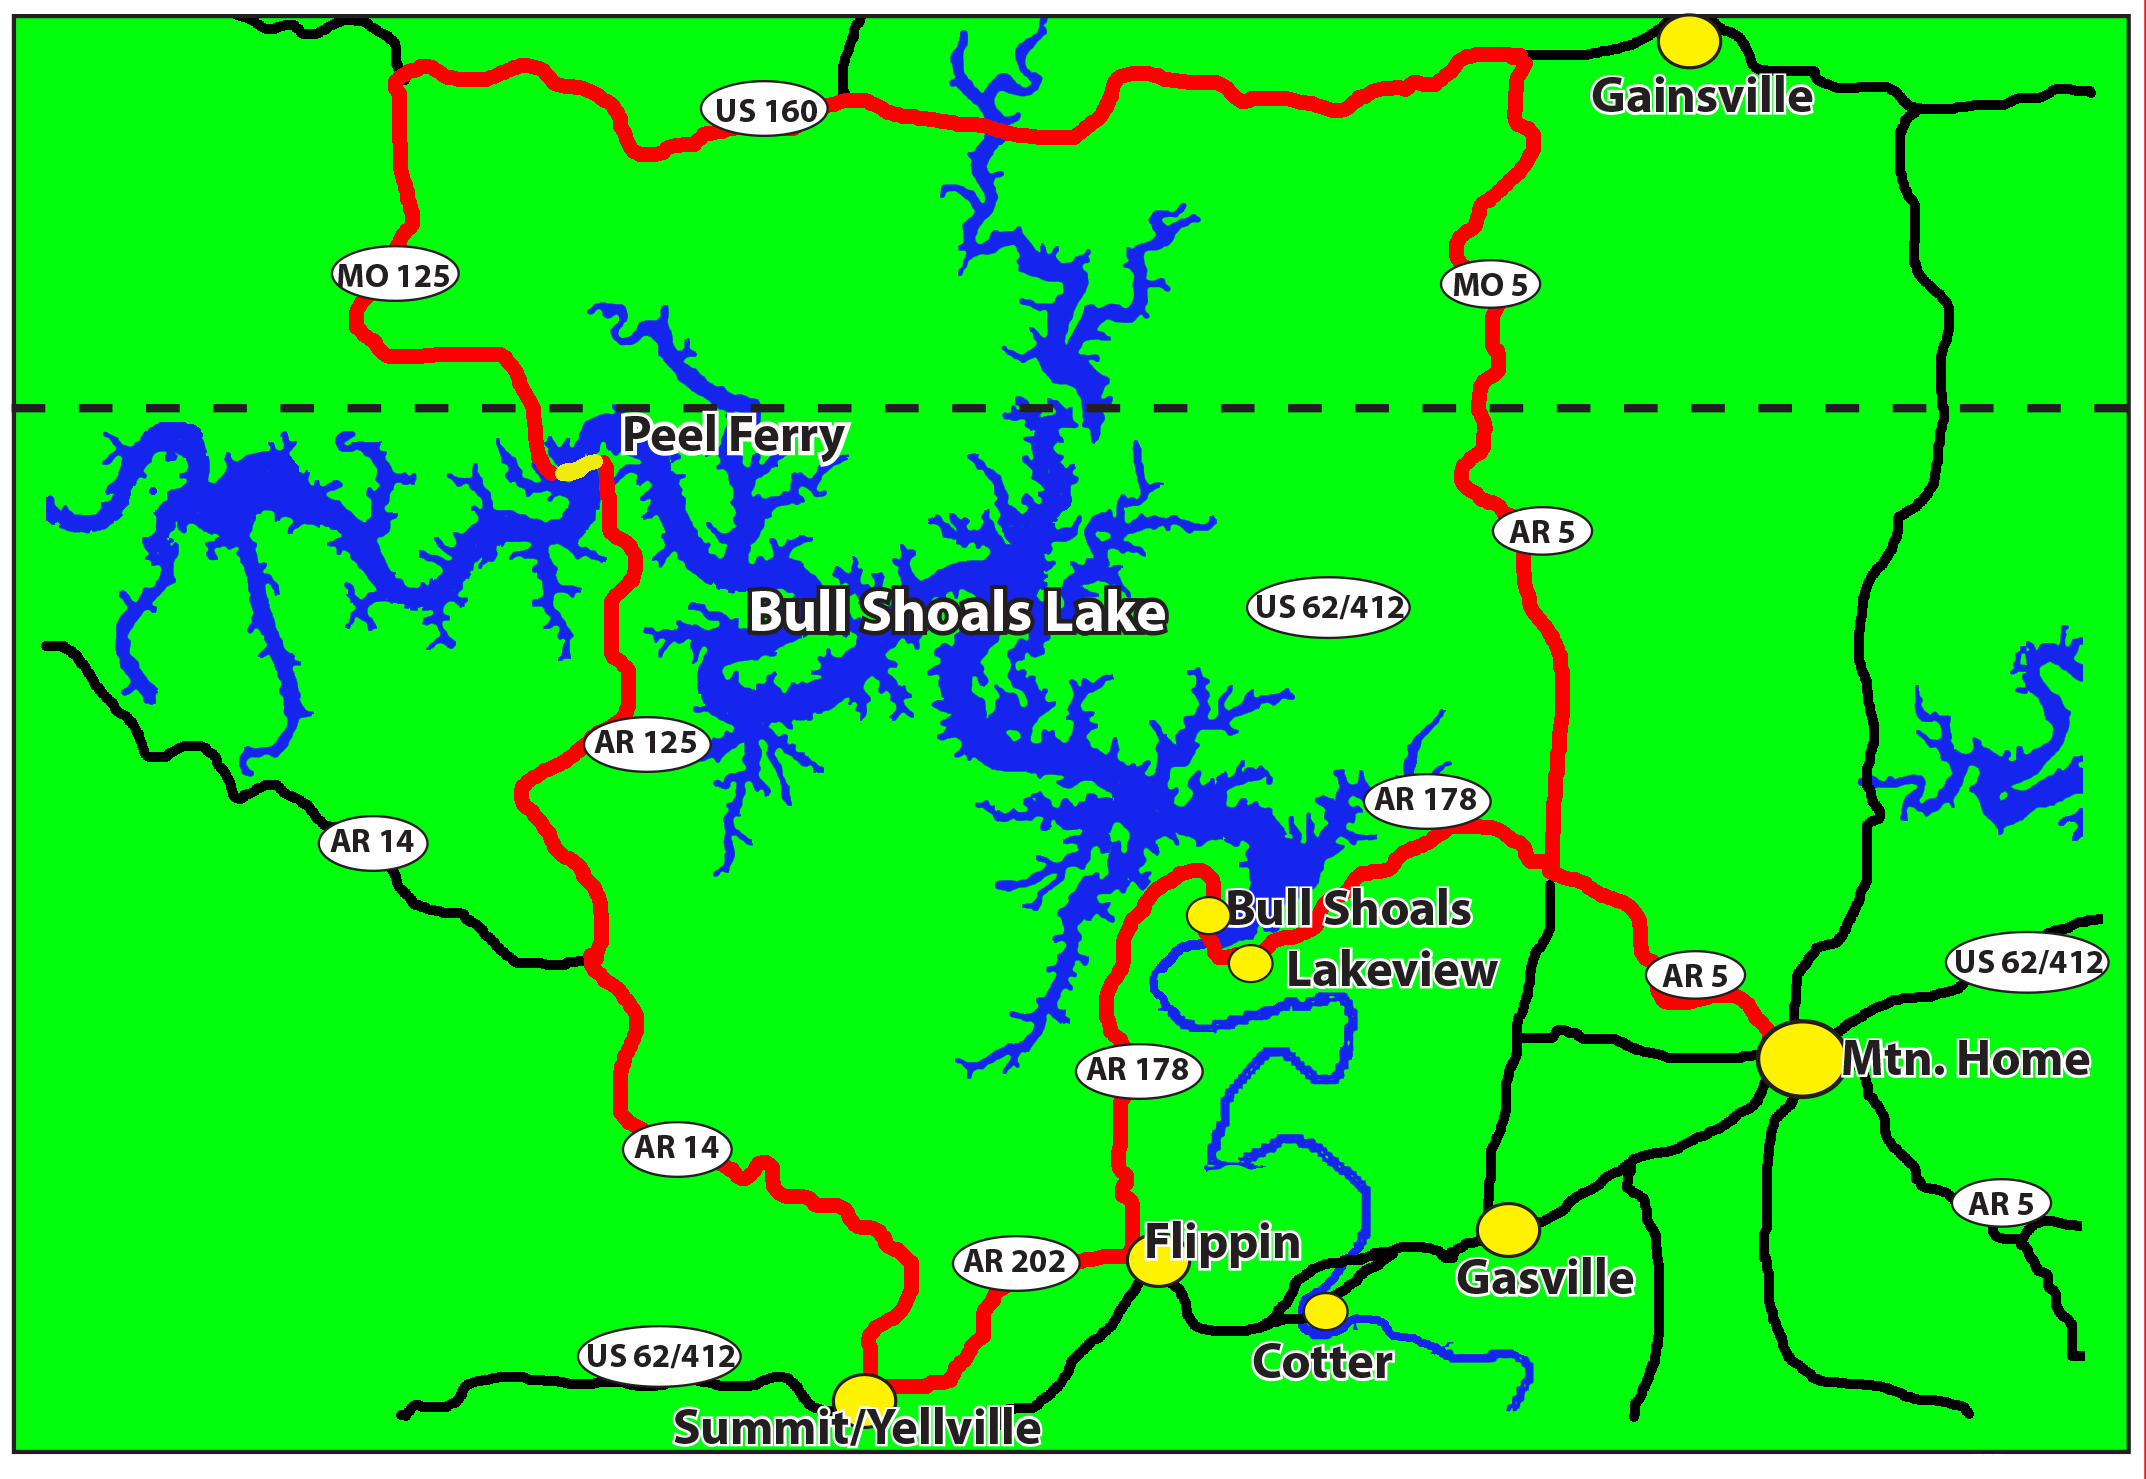 The Bull Shoals' Peel Ferry Ride Map